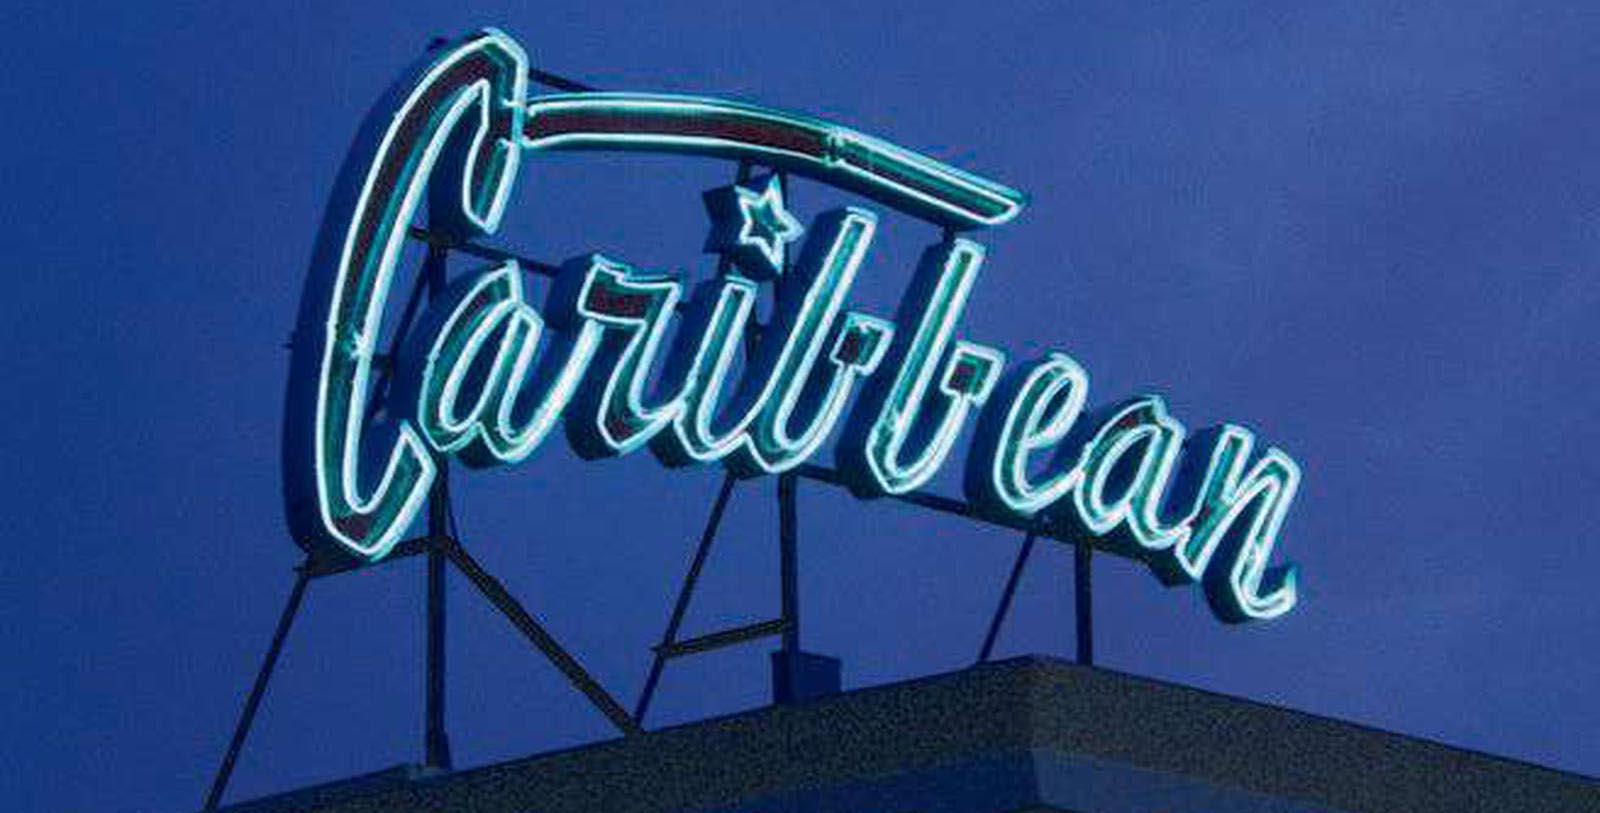 Image of Hotel sign at Caribbean Motel, 1957, Member of Historic Hotels of America, in Wildwood Crest, New Jersey, Experience